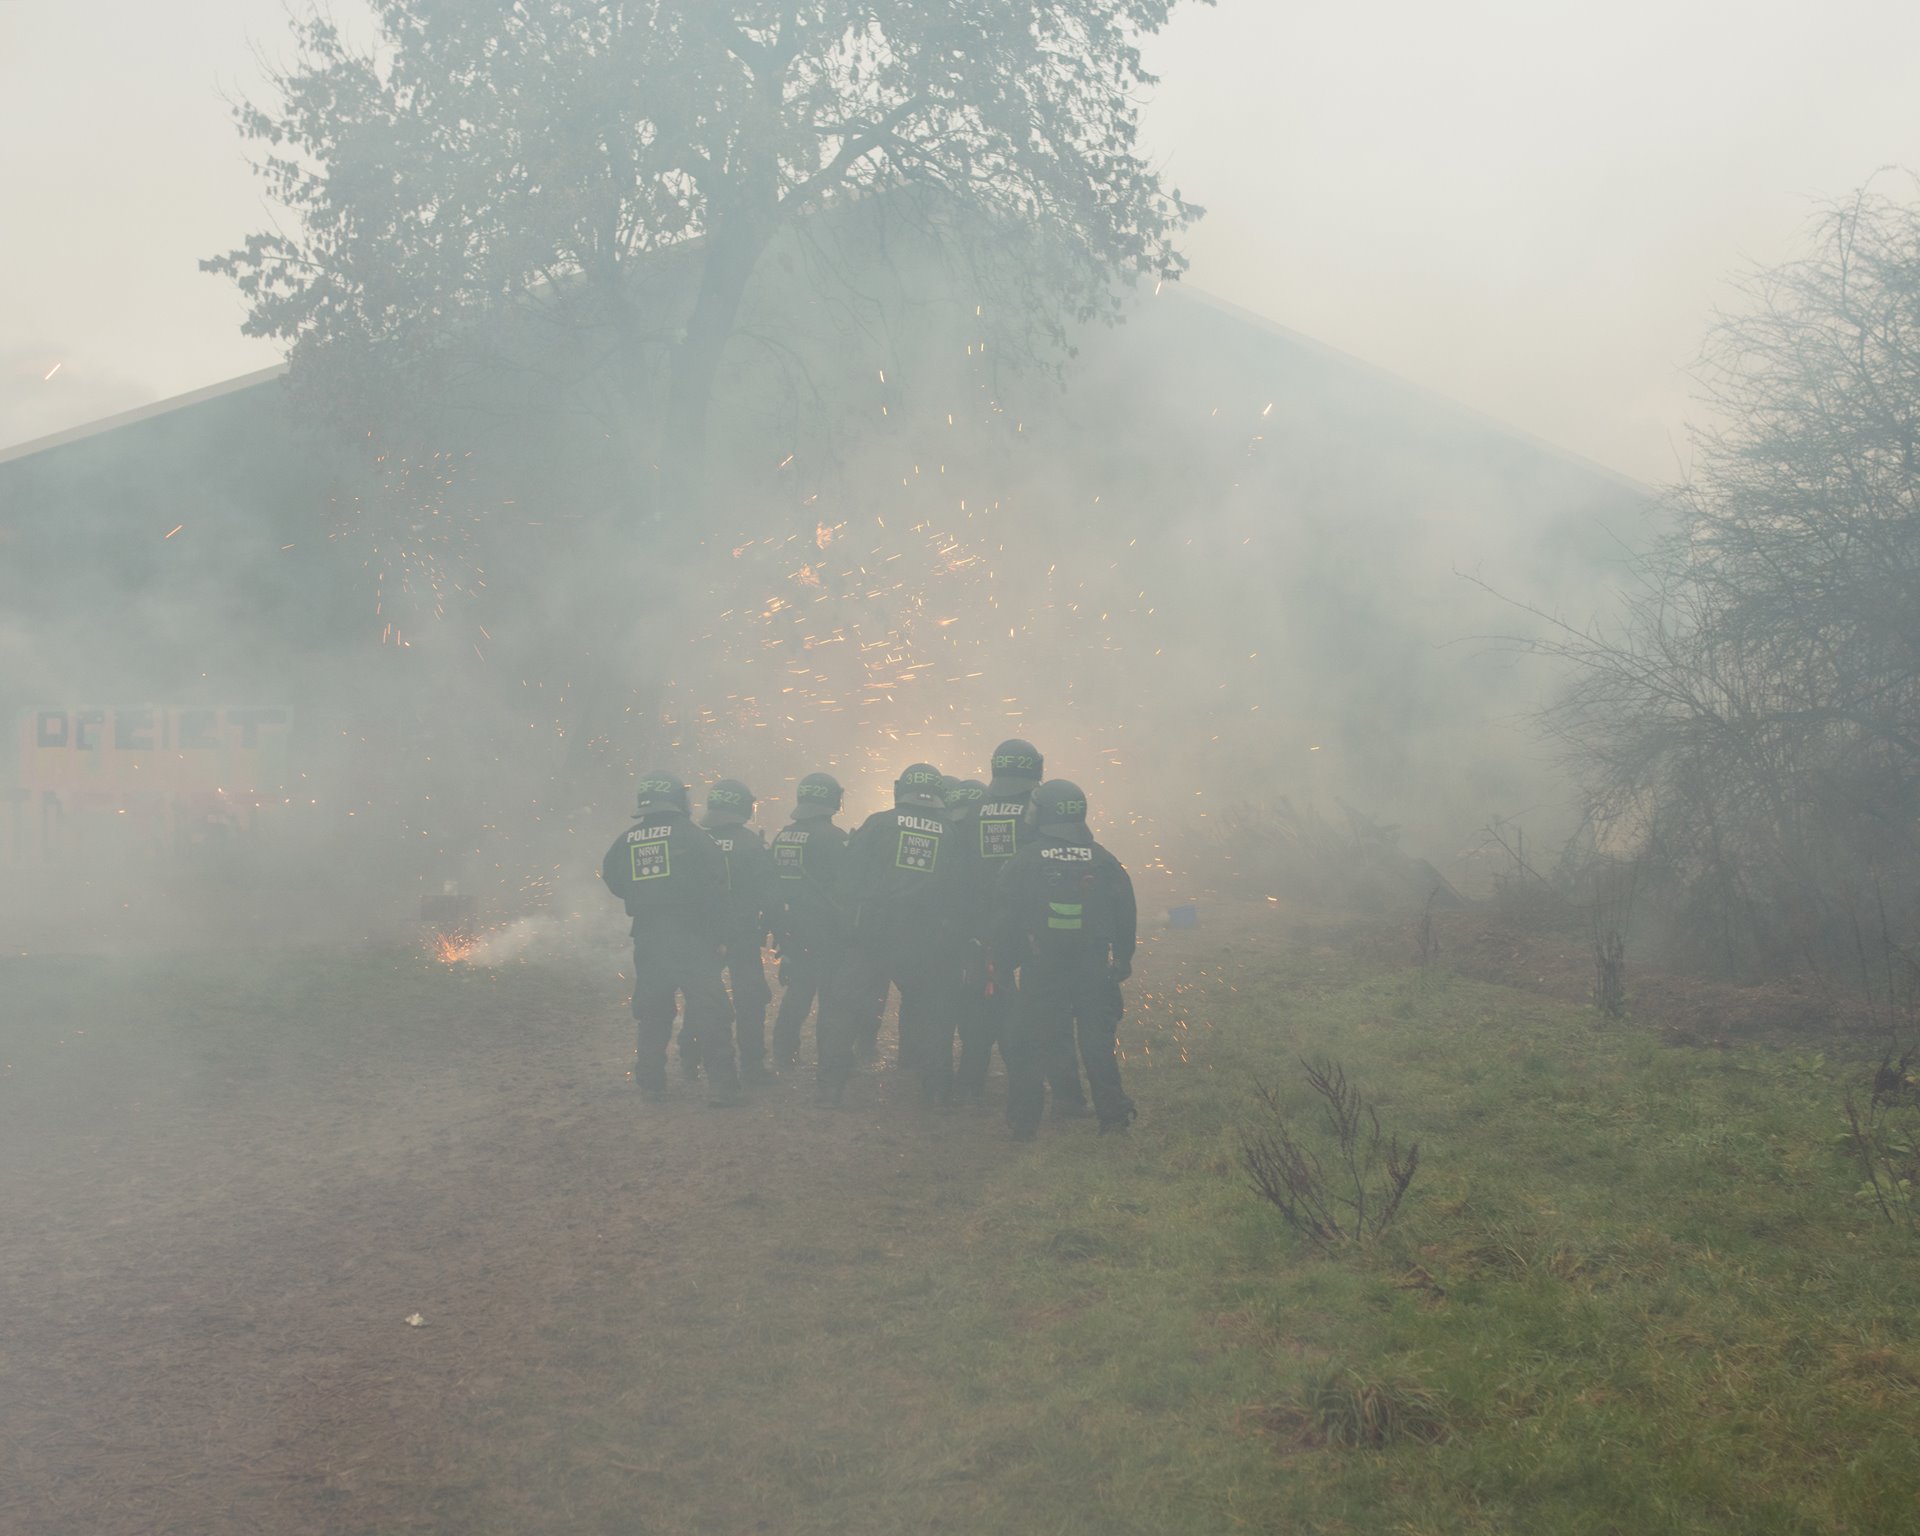 Activists launch fireworks at police carrying out the evacuation of the village of Lützerath, Germany. Police units entered the village from several directions, gaining control within a few hours.